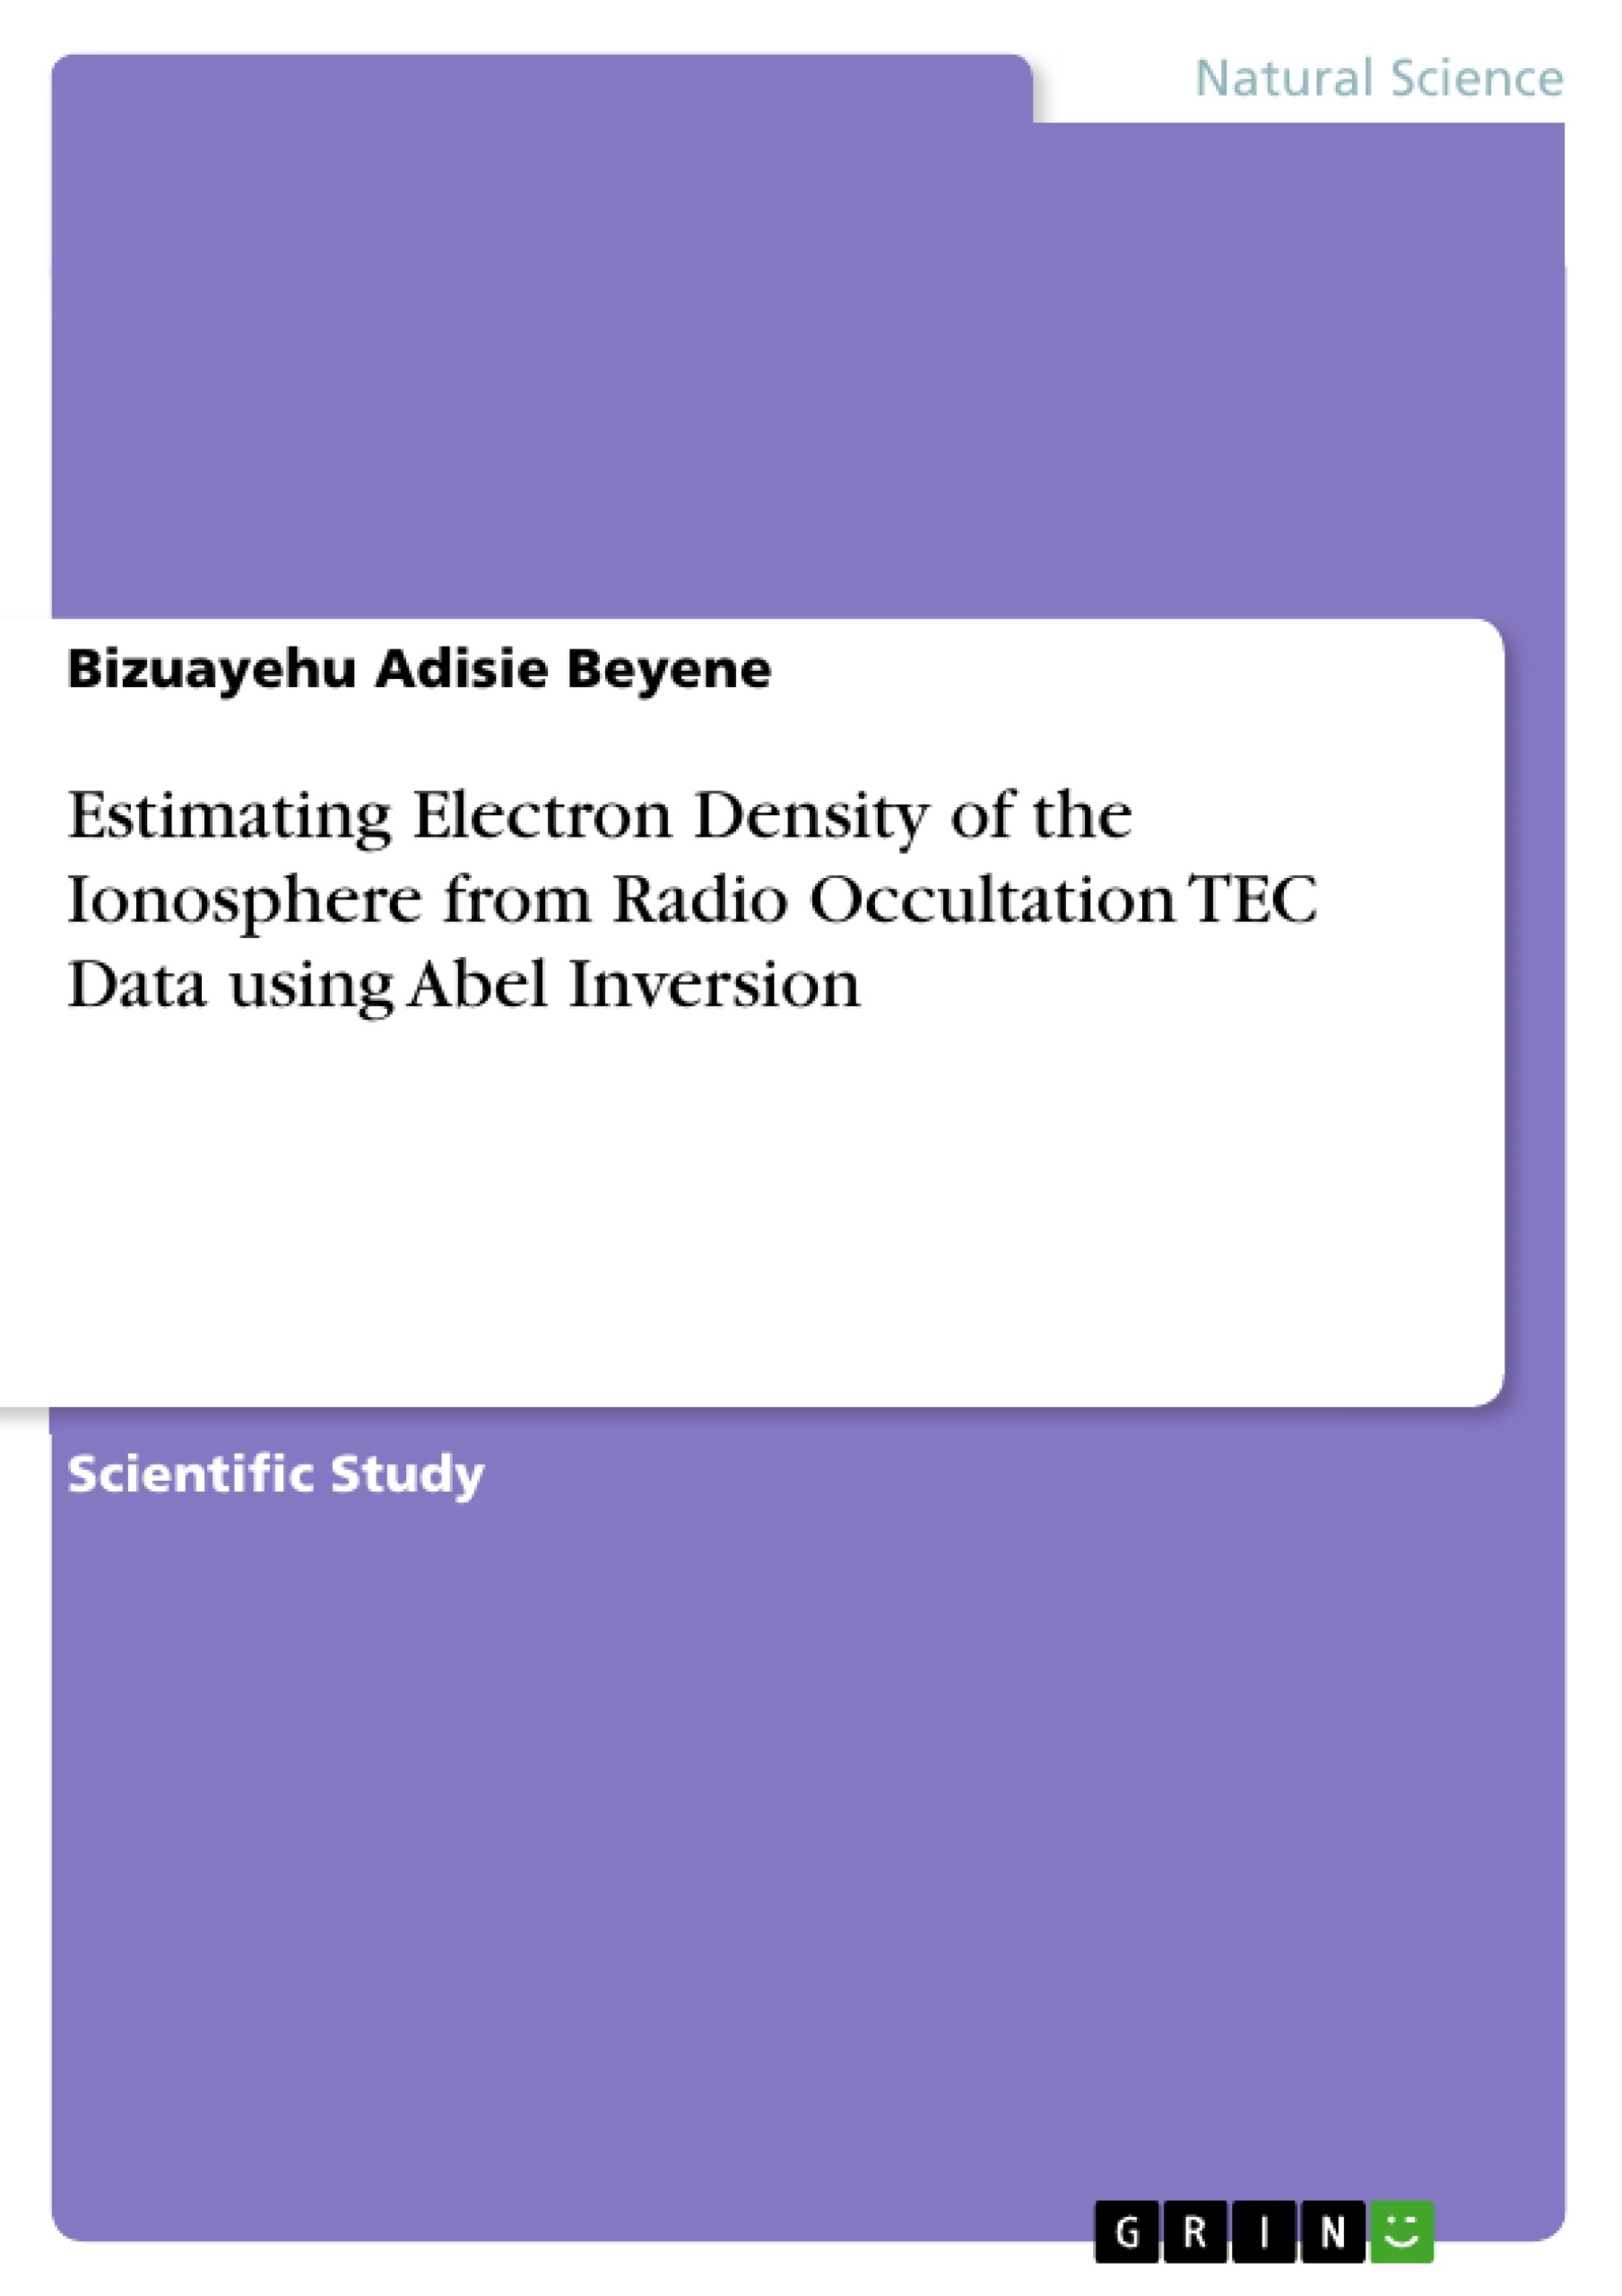 Titre: Estimating Electron Density of the Ionosphere from Radio Occultation TEC Data using Abel Inversion